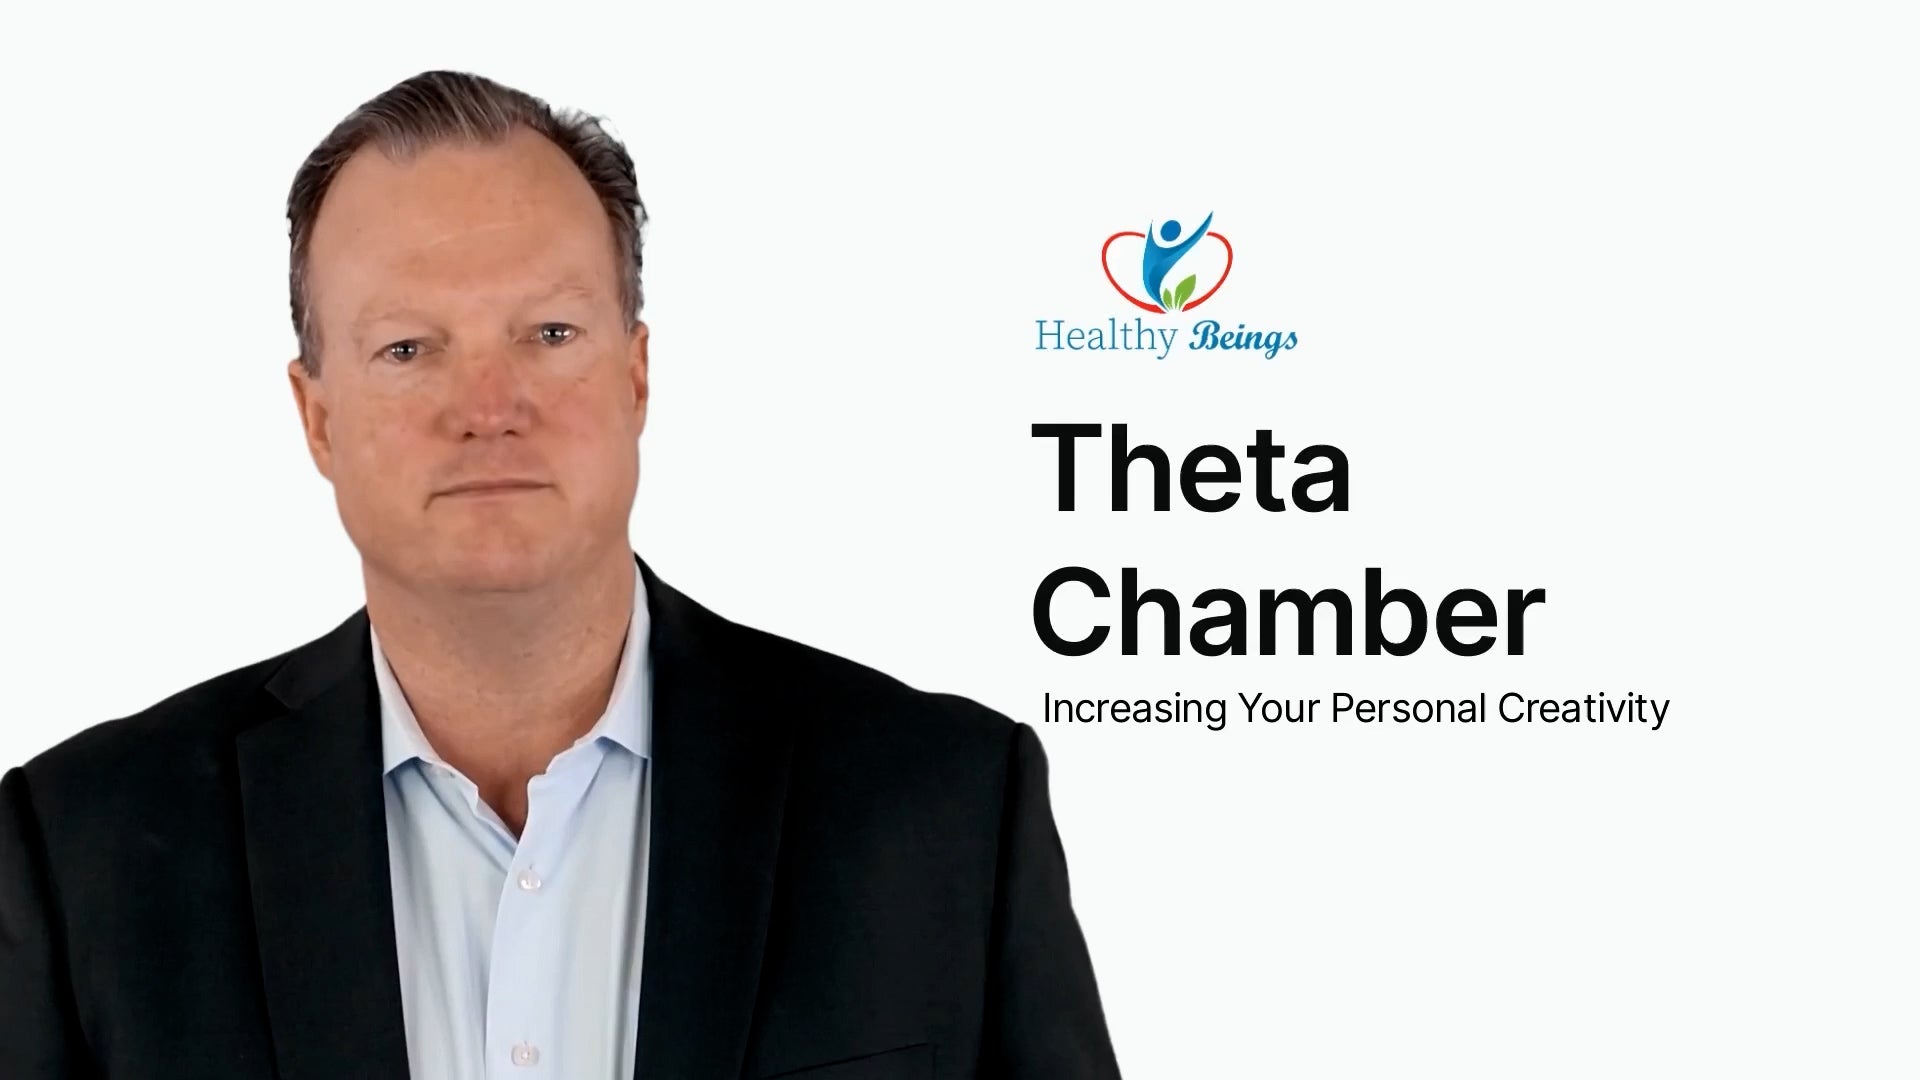 Load video: Theta Chamber Increasing Your Personal Creativity